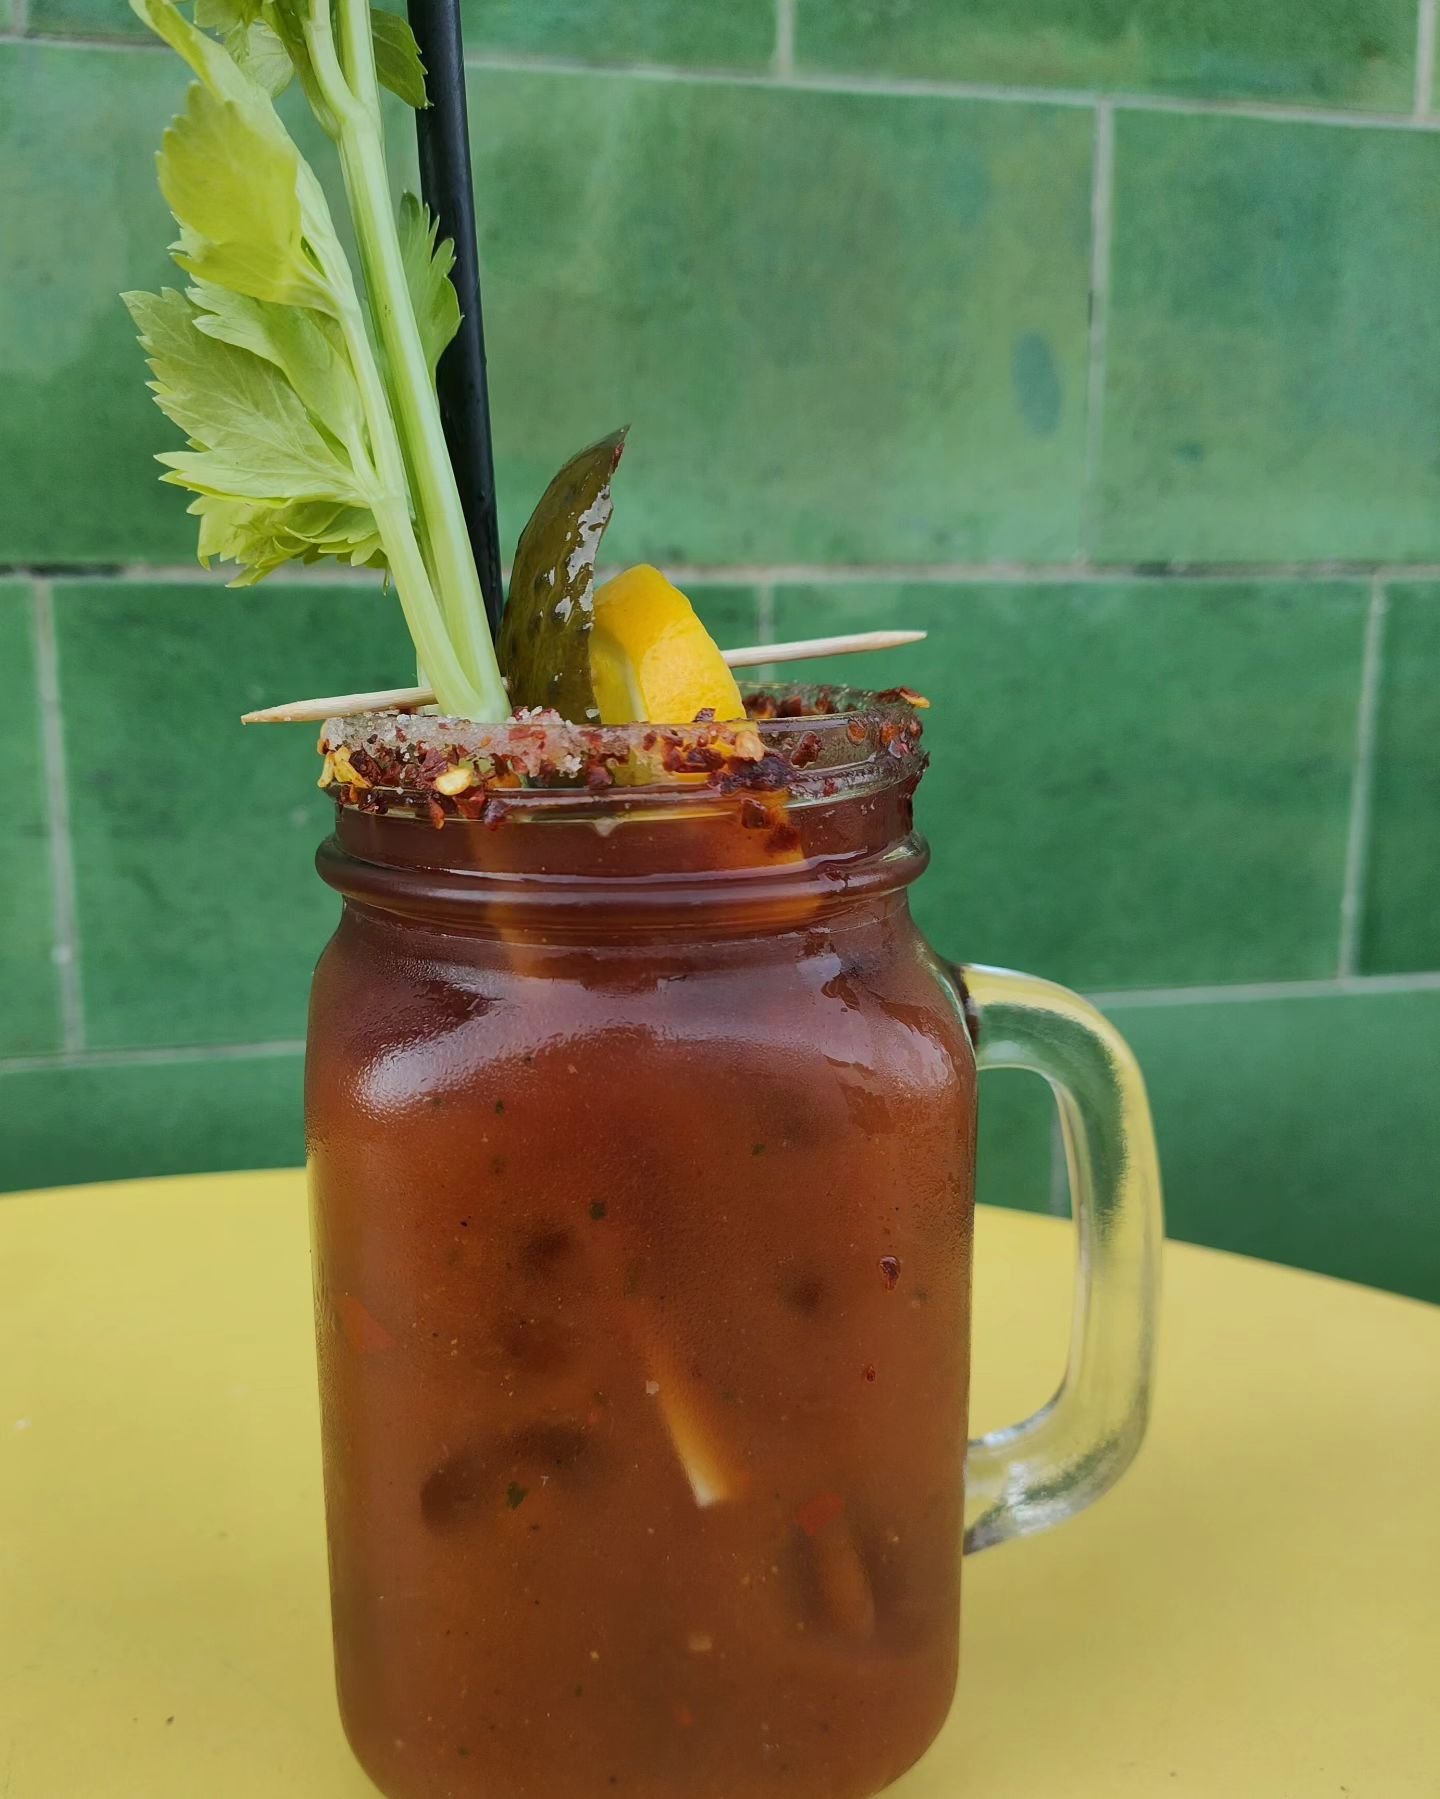 Sunday Bloody Sunday 🍹it's now 2-for-1 delicious Bloody Mary's every Sunday when ordering breakfast!

How spicy do you like yours? We can add our homemade harrisa for a spicy kick 🔥 

Sunday's are all about brunch and Mary's here at Village, servin